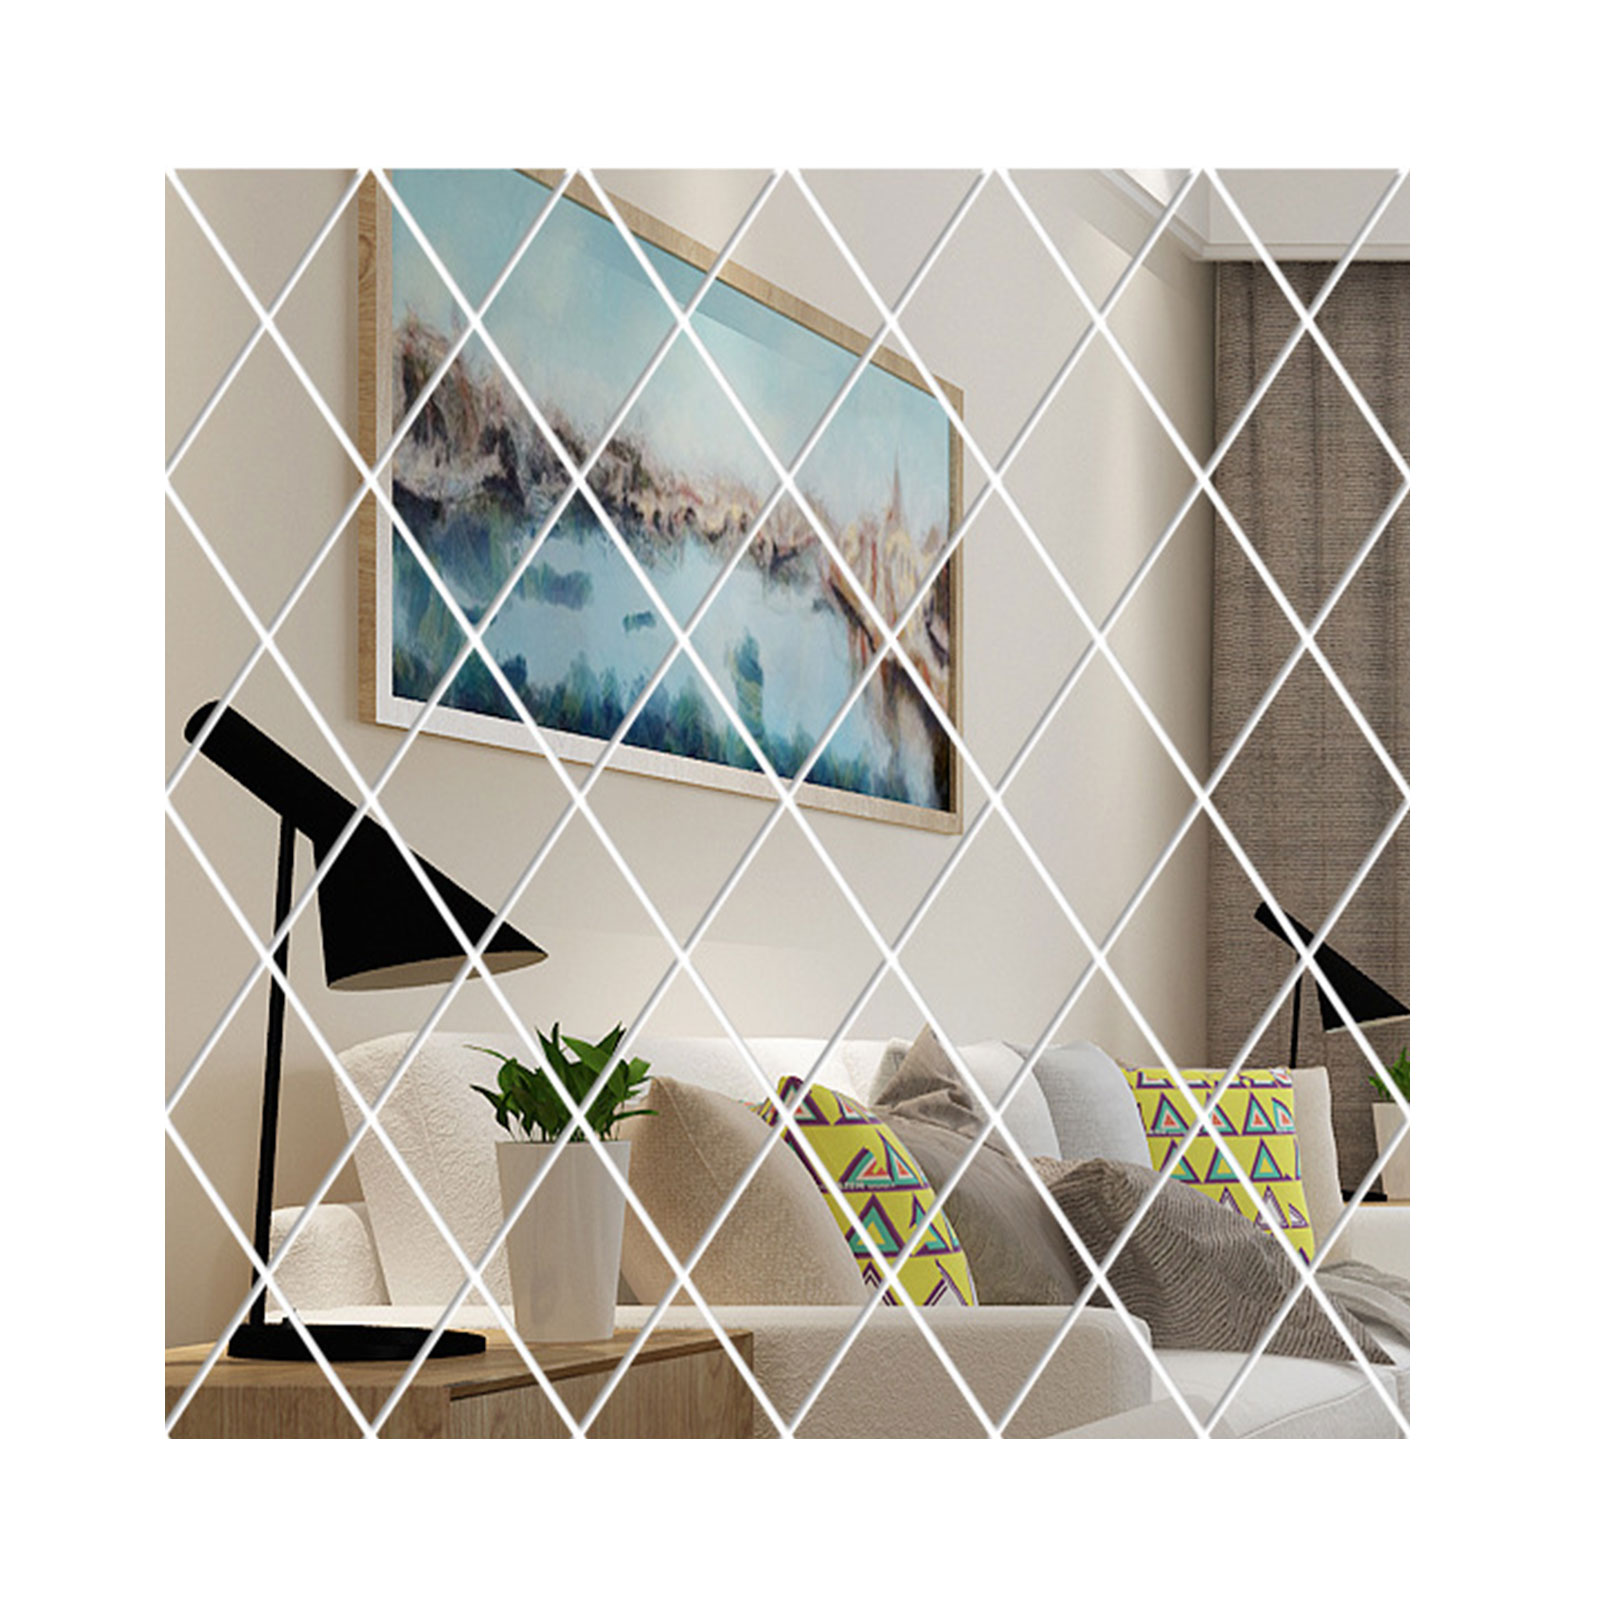 Wall Mirror Stickers 3D Rhombus Art Mural Decal Home Decor Removable Stylish JJ